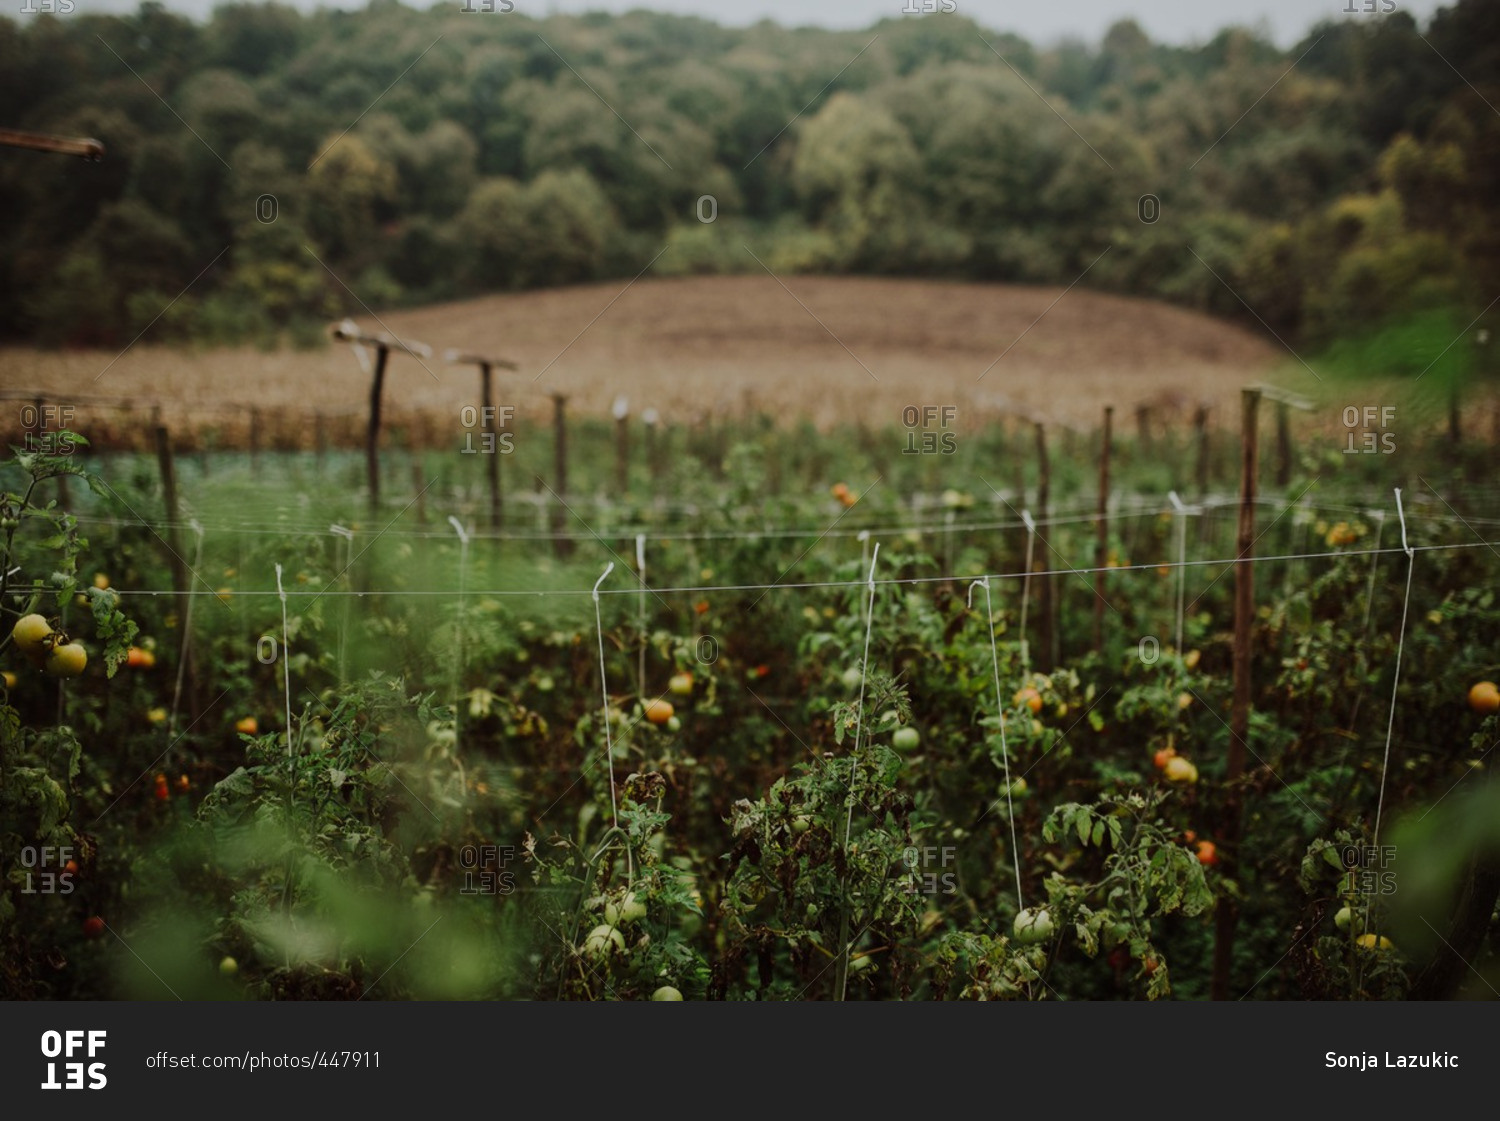 Staked tomato plants in field in autumn